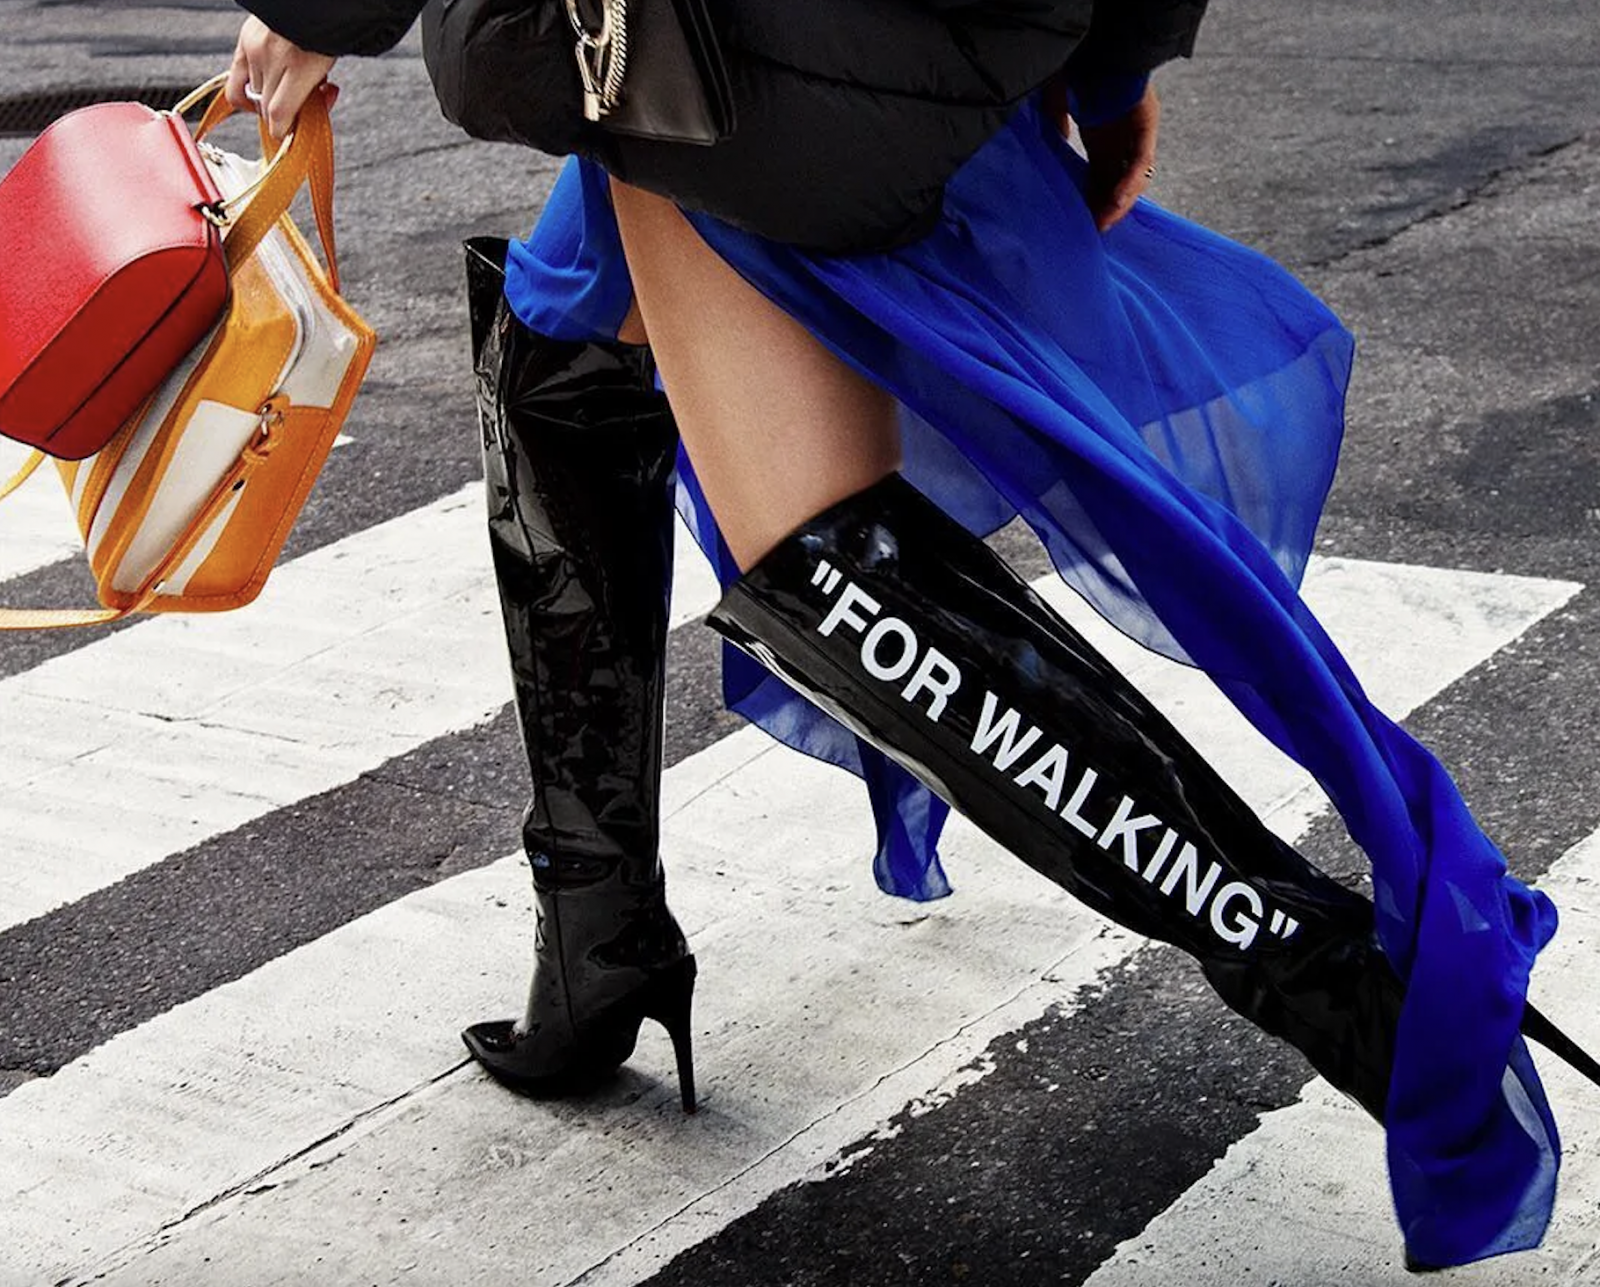 Boots featuring the words "FOR WALKING"